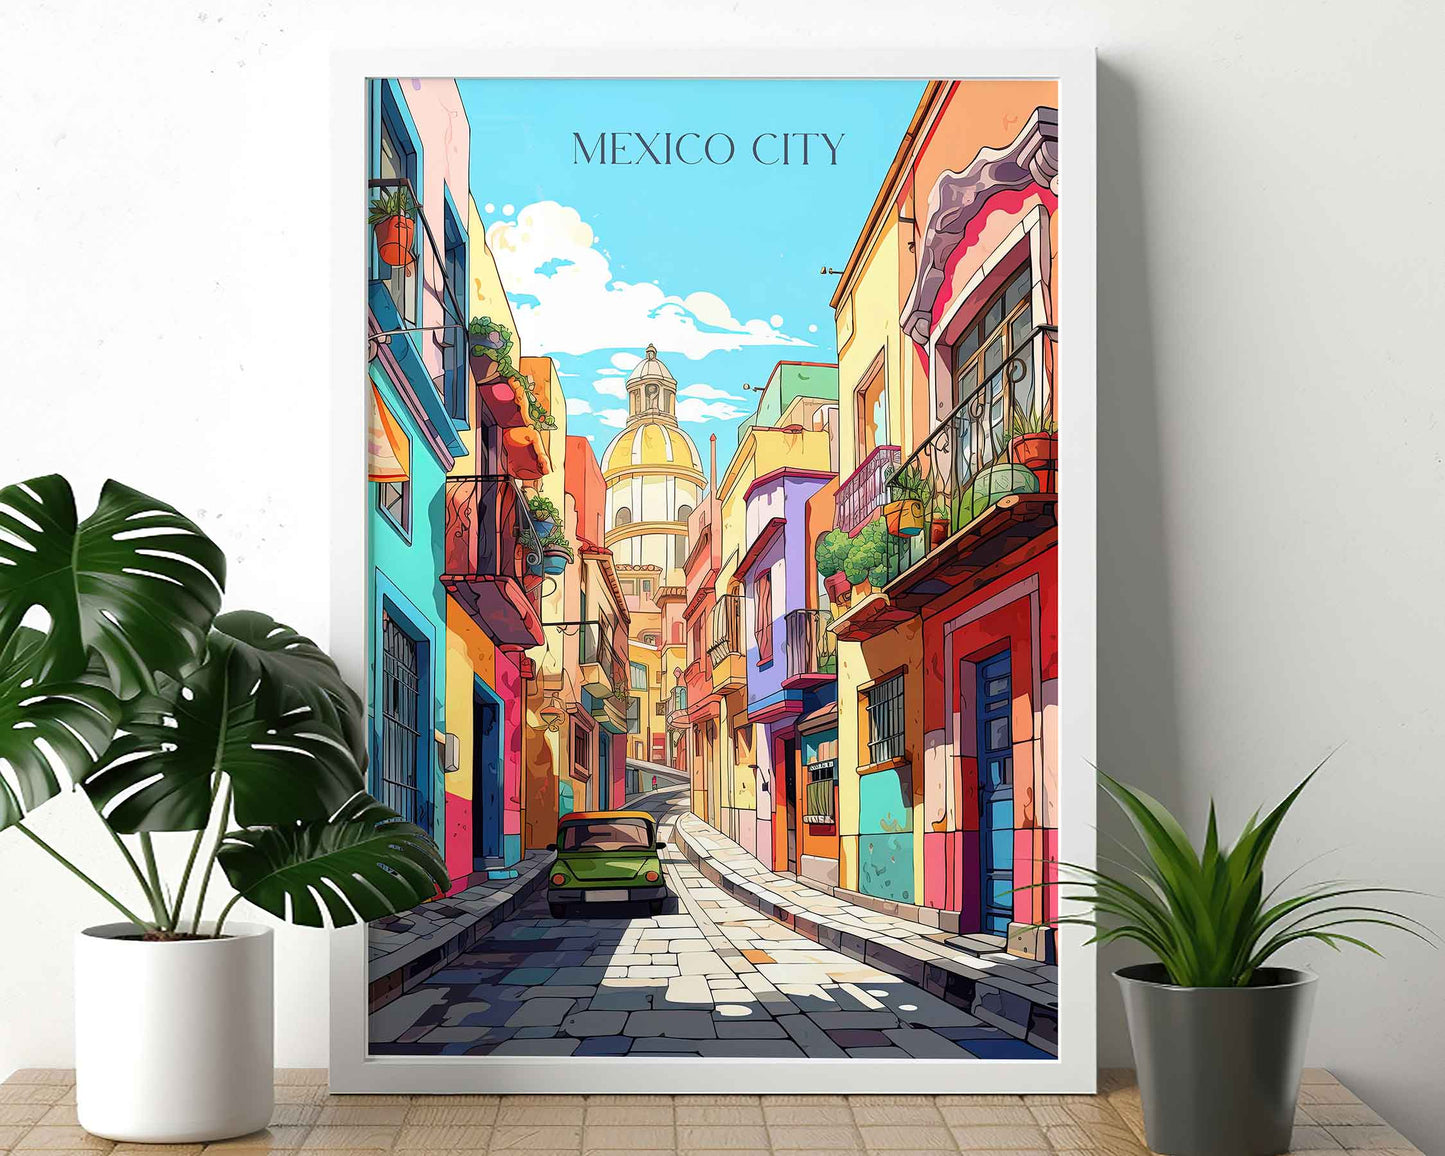 Framed Image of Mexico City Travel Poster Prints Wall Art Illustration